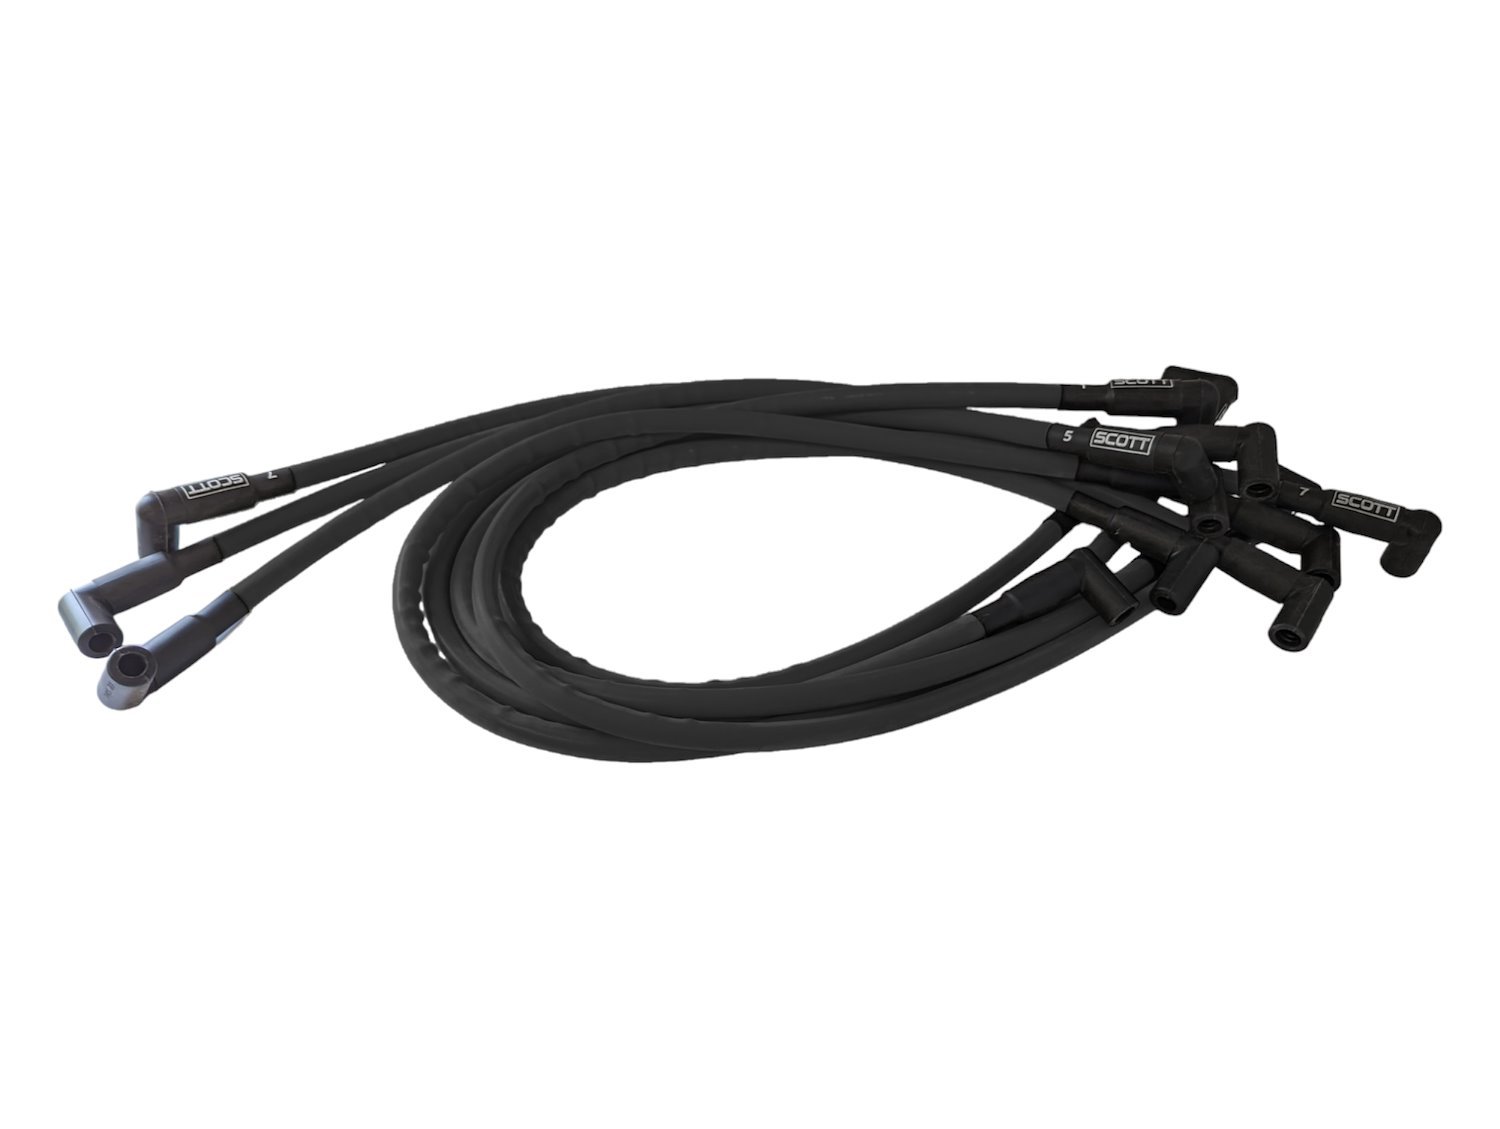 SPW-CH-402-1 High-Performance Silicone-Sleeved Spark Plug Wire Set for Small Block Chevy, Over Valve Cover [Black]